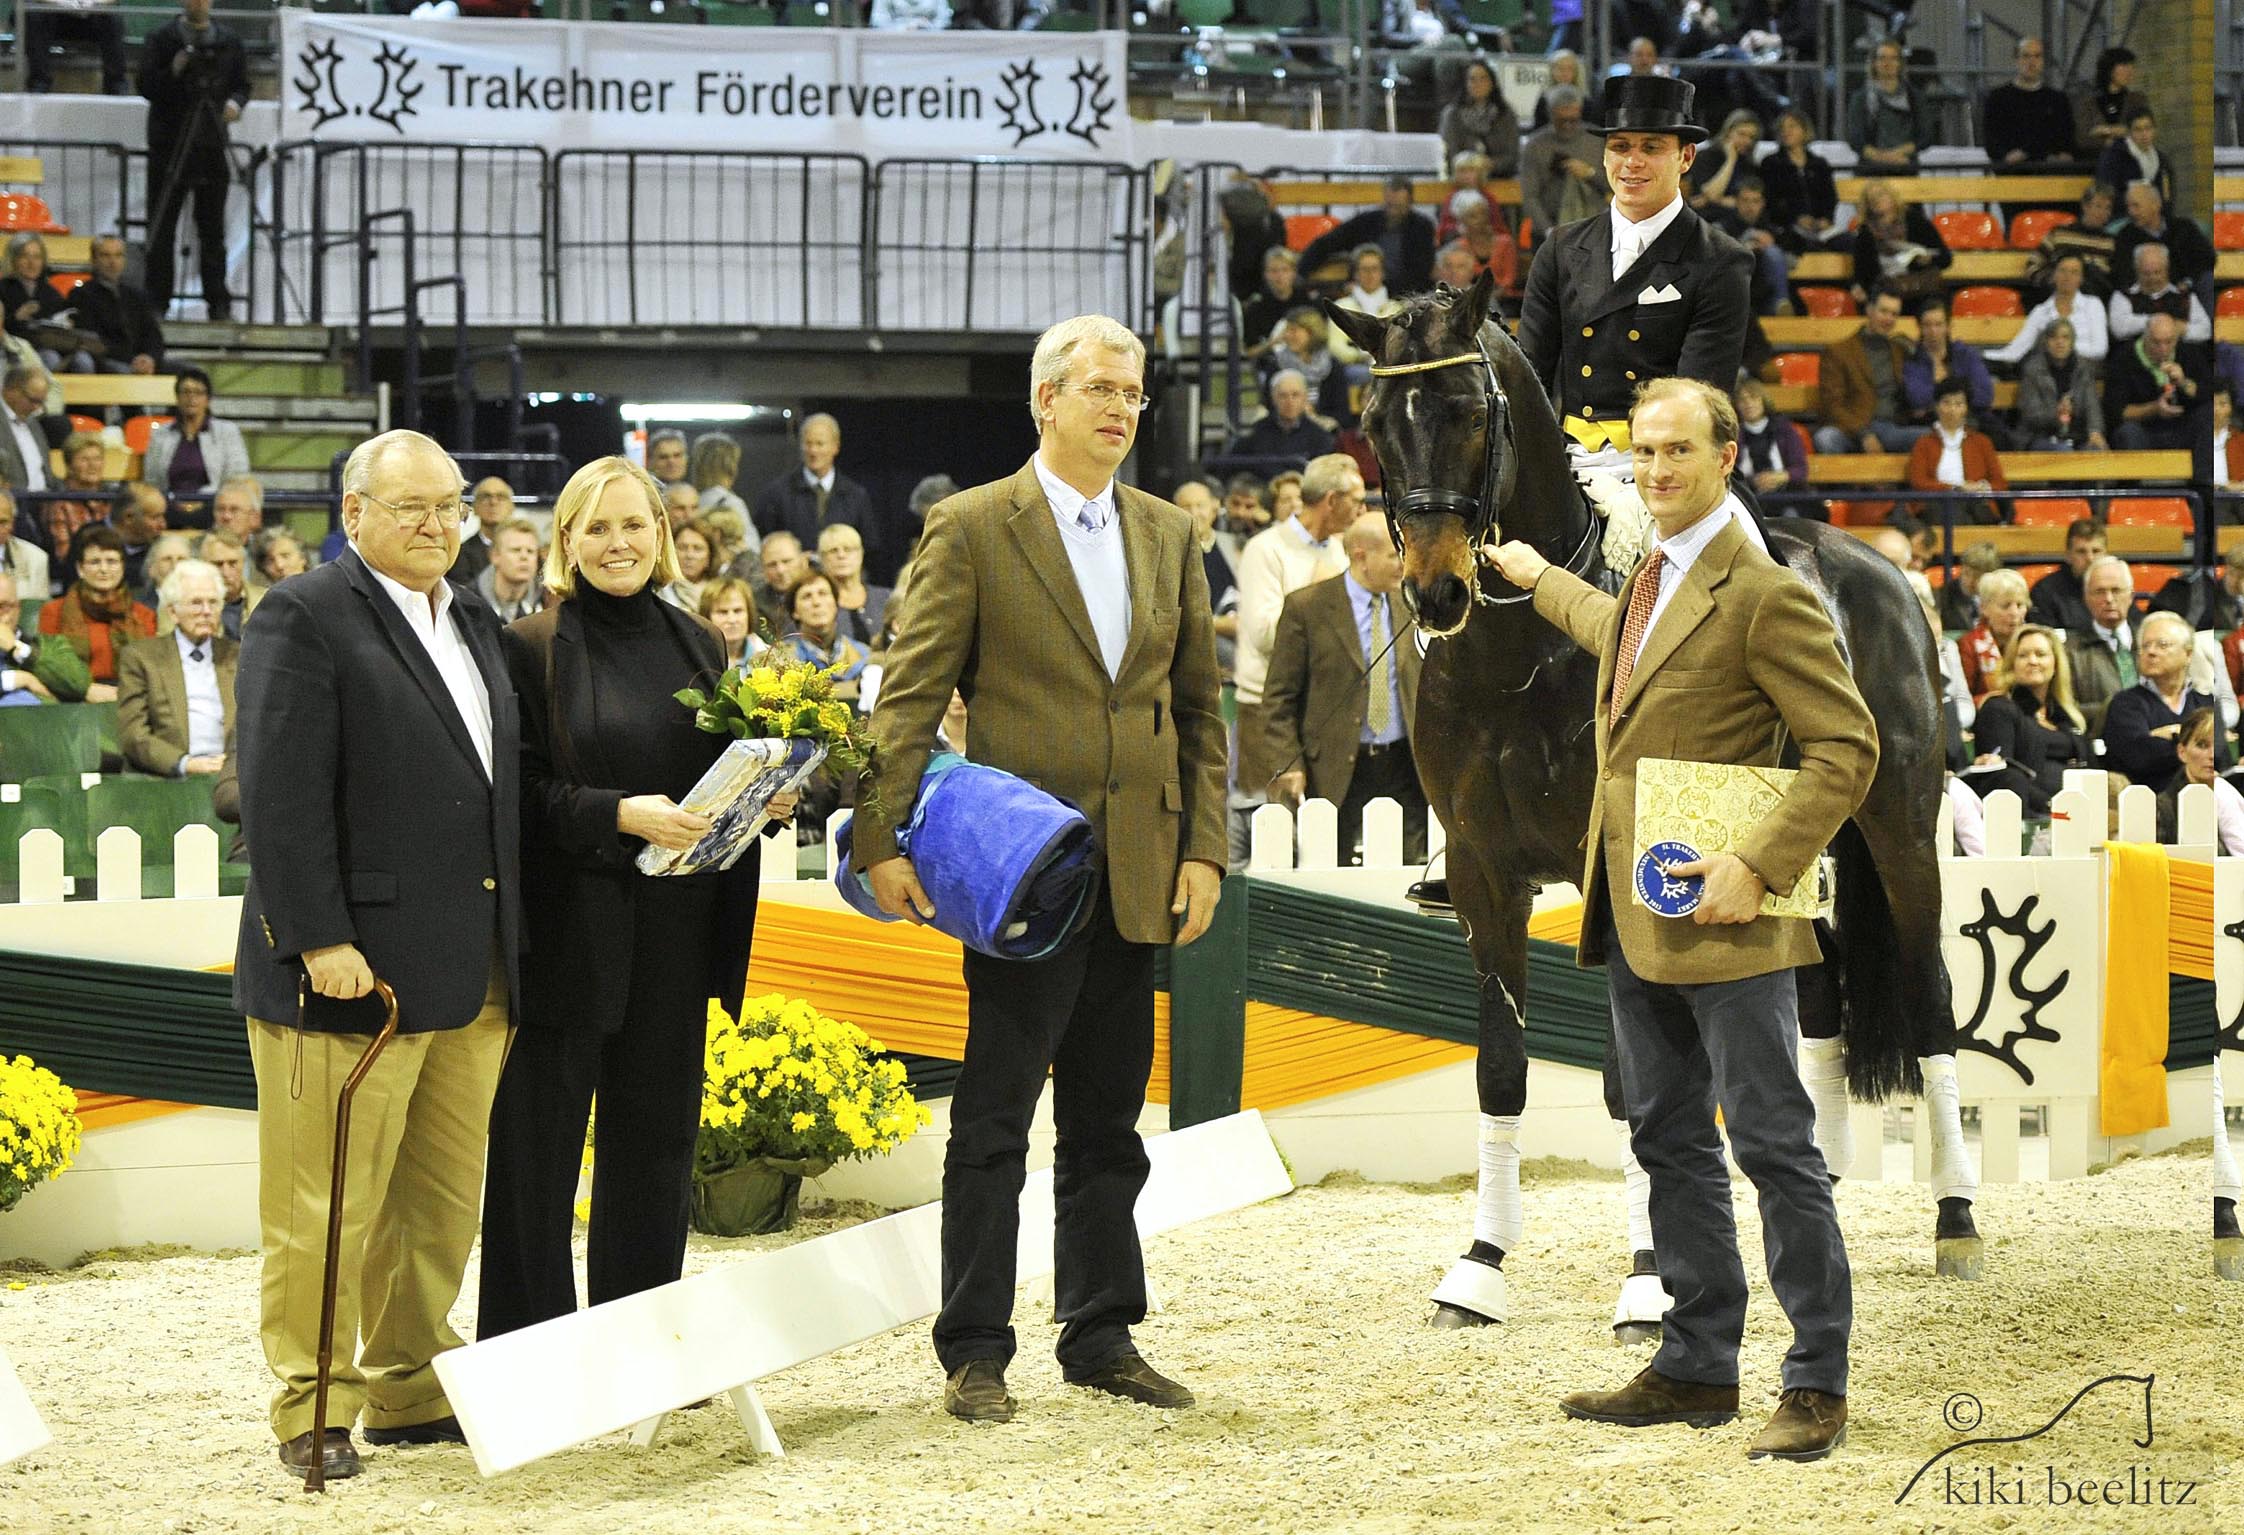 Herzensdieb, pictured with Doug and Louise Leatherdale, Jens Meyer and Prince Donatus Von Hessen, receives the Elite title from the Trakehner Verband